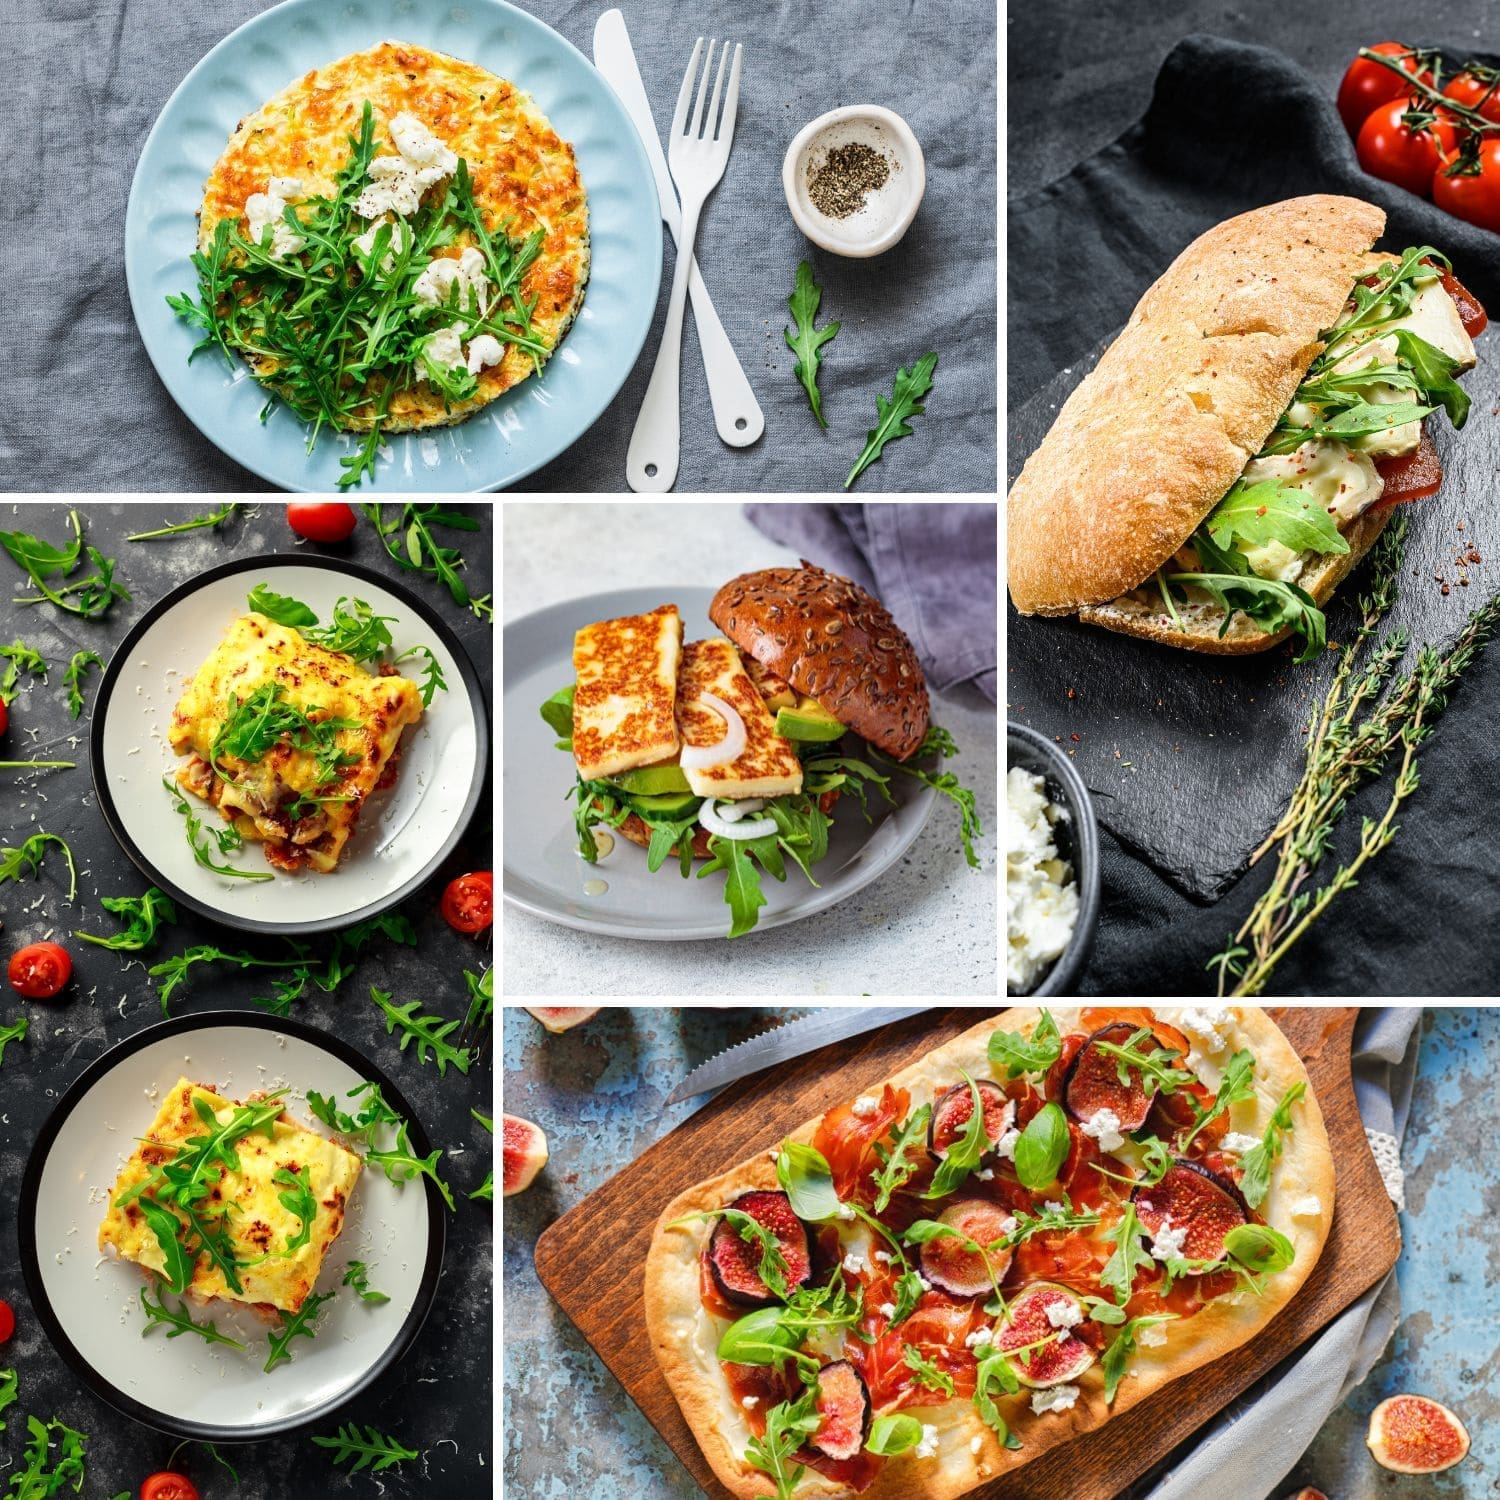 A collage of five photos of different foods: Frittata with goat cheese and arugula, Homemade pizza with figs, prosciutto, and arugula, Lasagna topped with wild arugula, Halloumi burger with avocado wedges and arugula, Sandwich with fresh camembert cheese, pear marmalade, ricotta, and arugula.